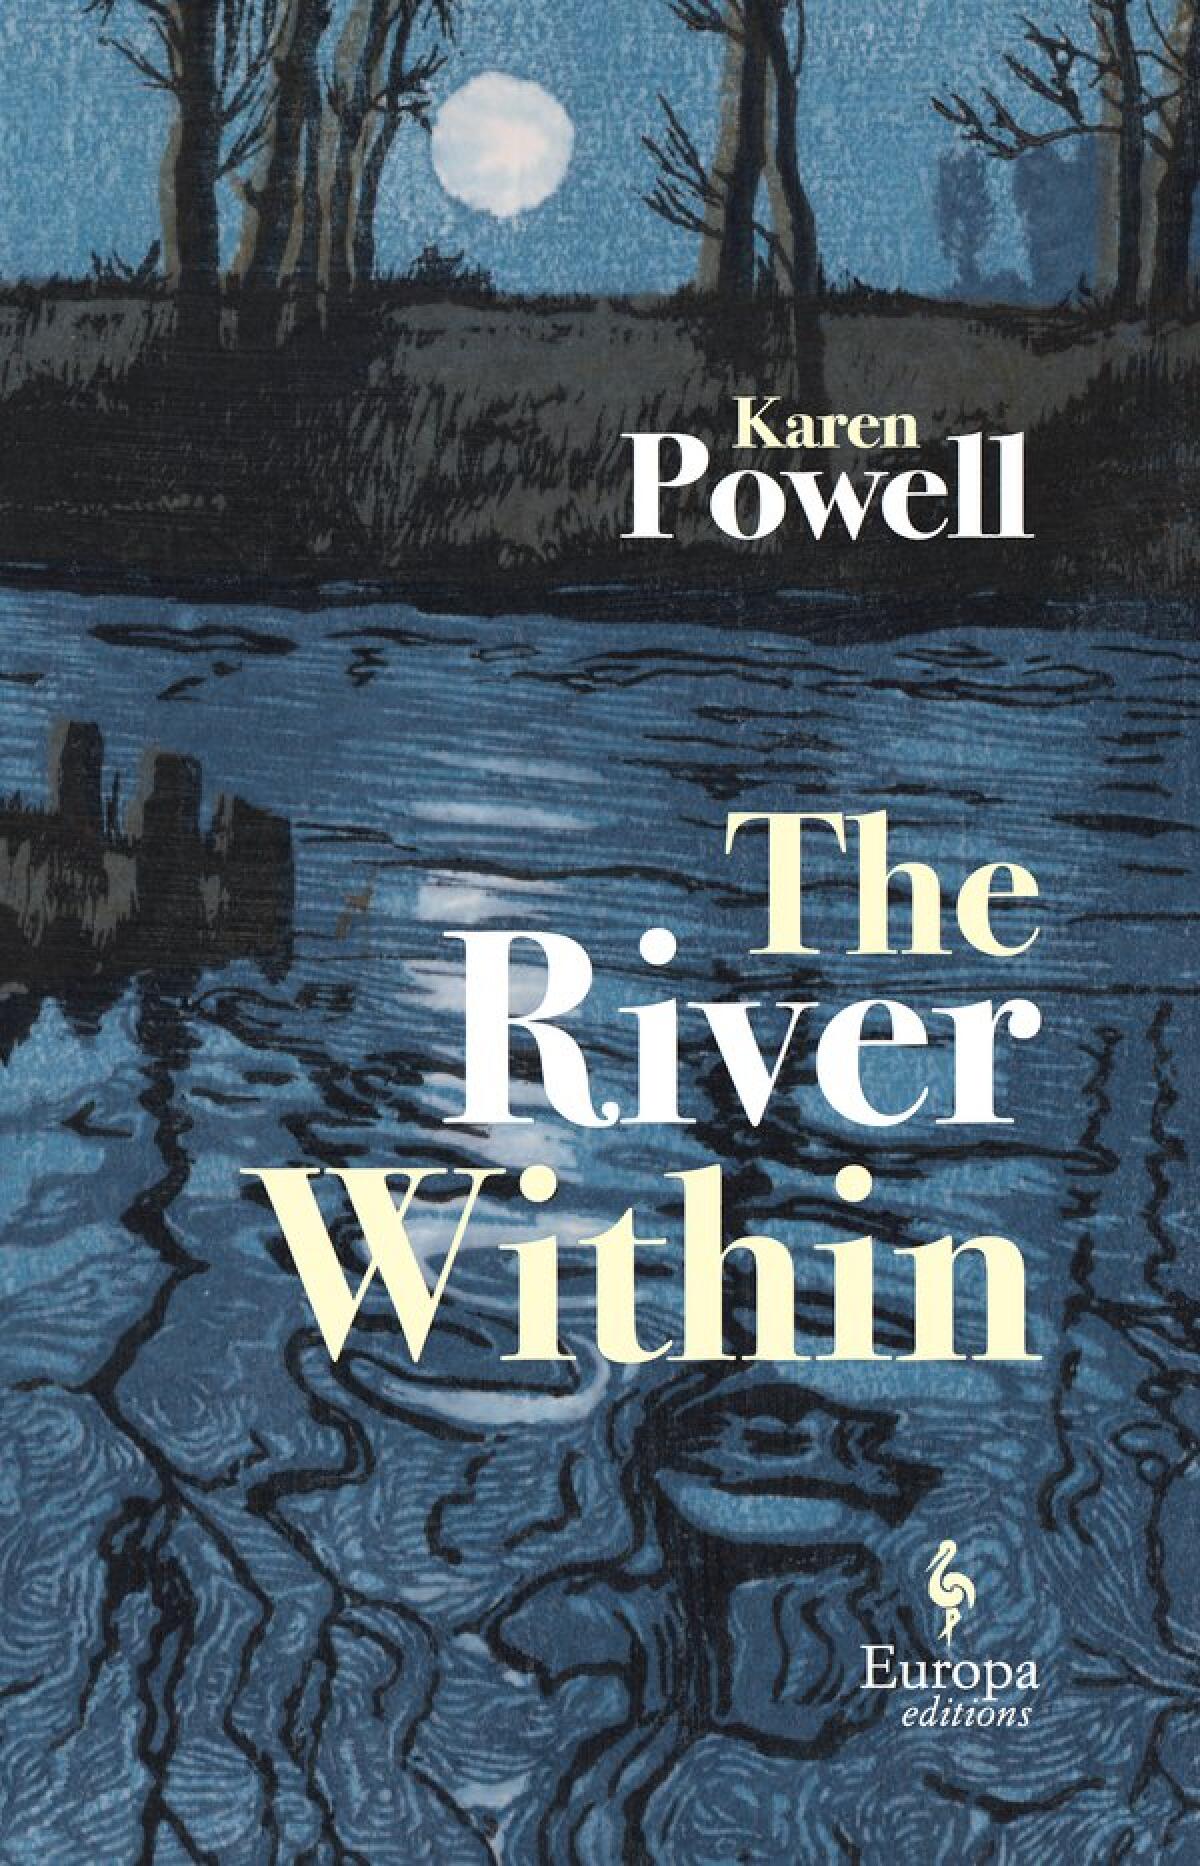 Book jacket for "The River Within" by Karen Powell.